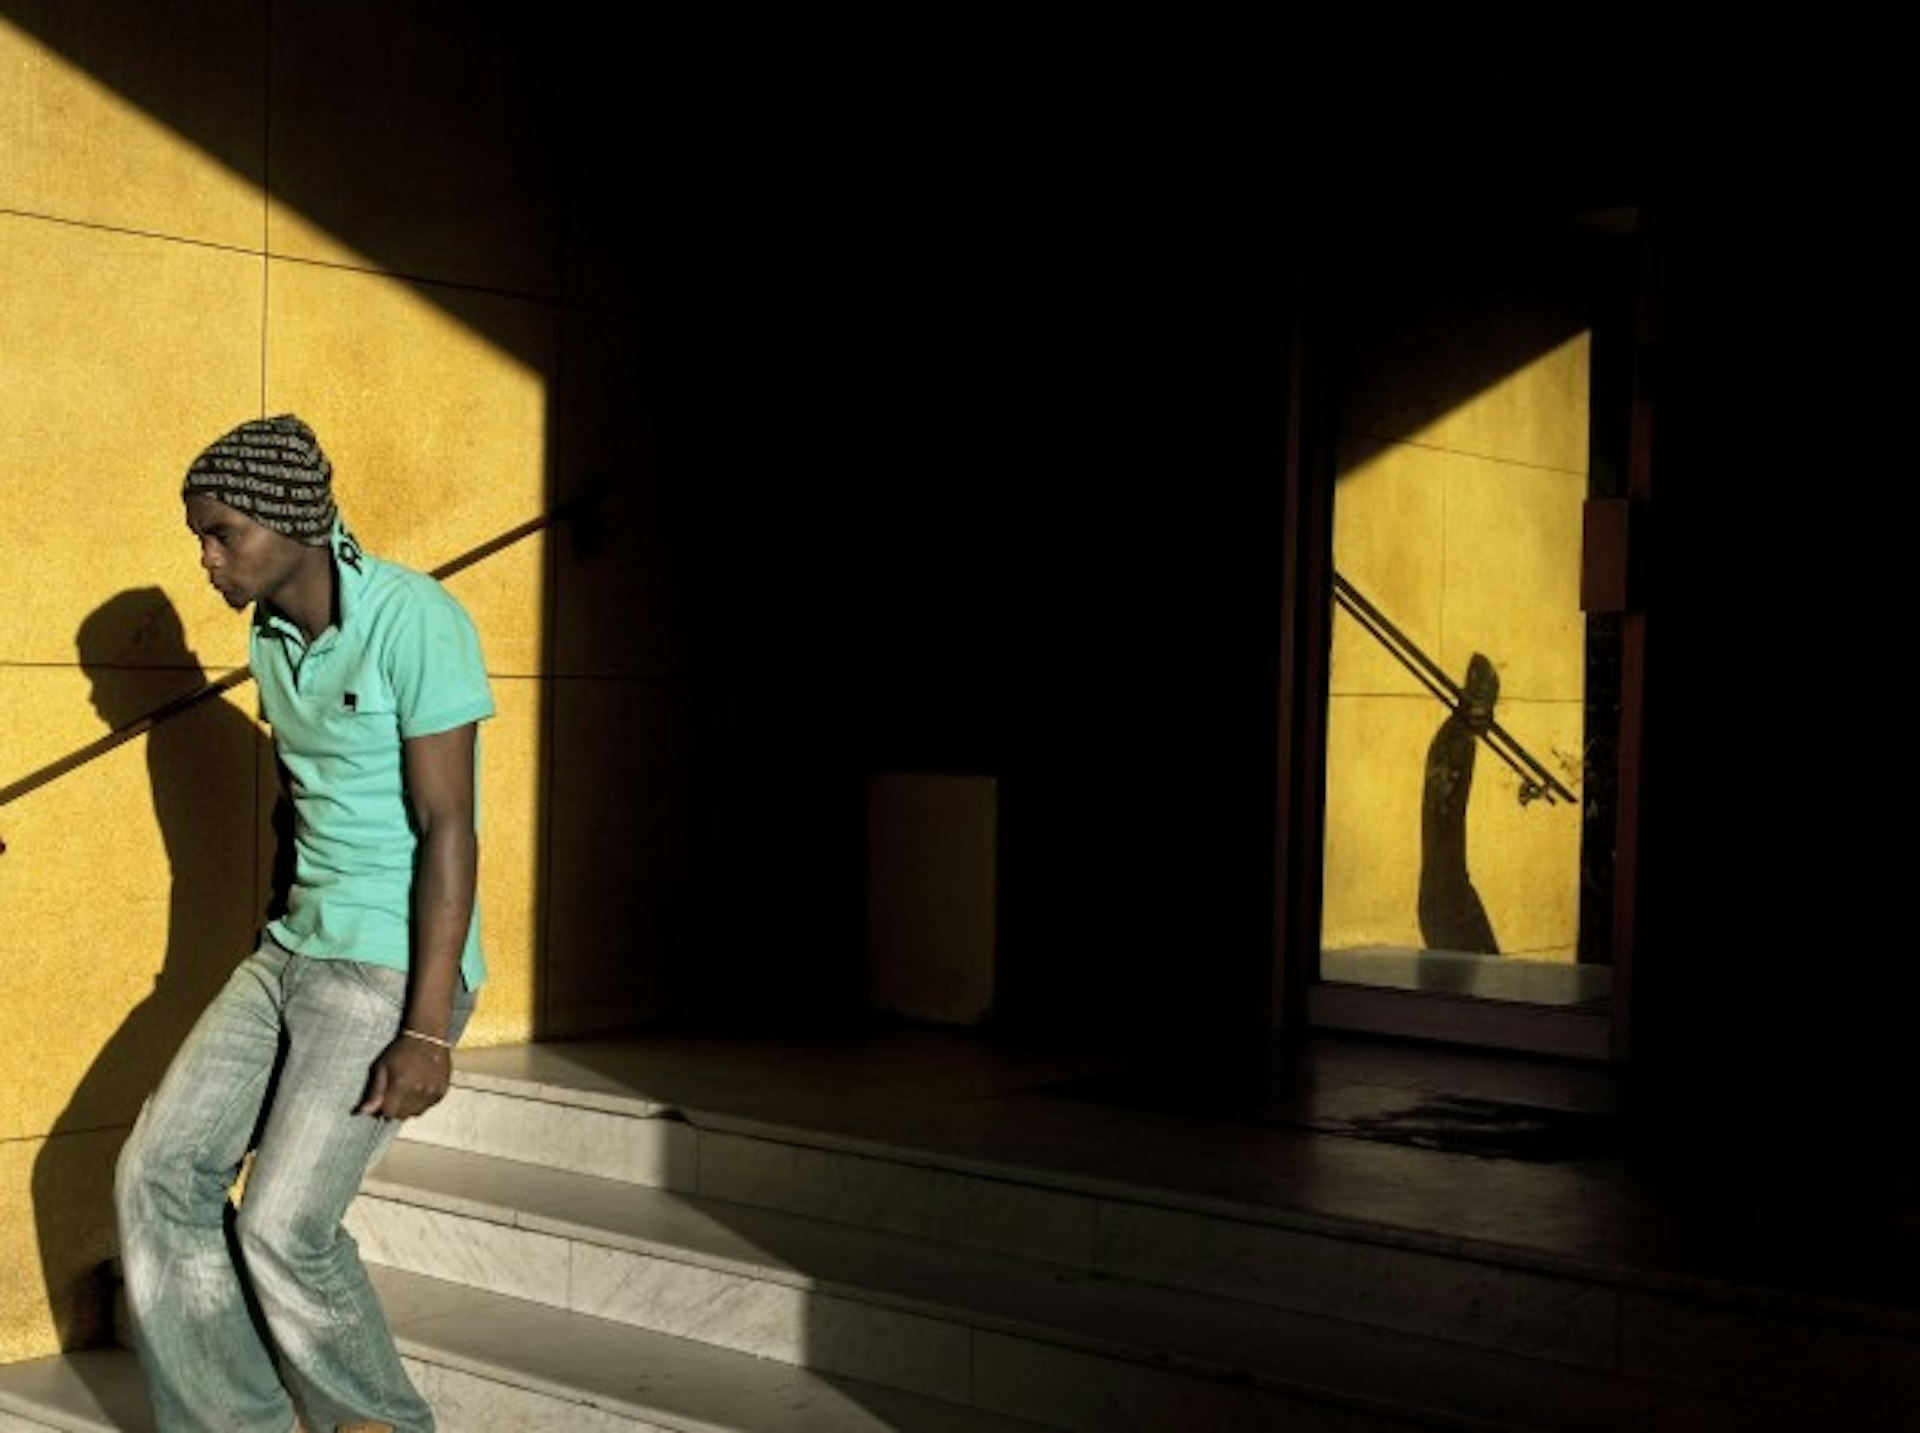 From ‘A City Refracted’ by Graeme Williams, Johannesburg, South Africa, 2012–14